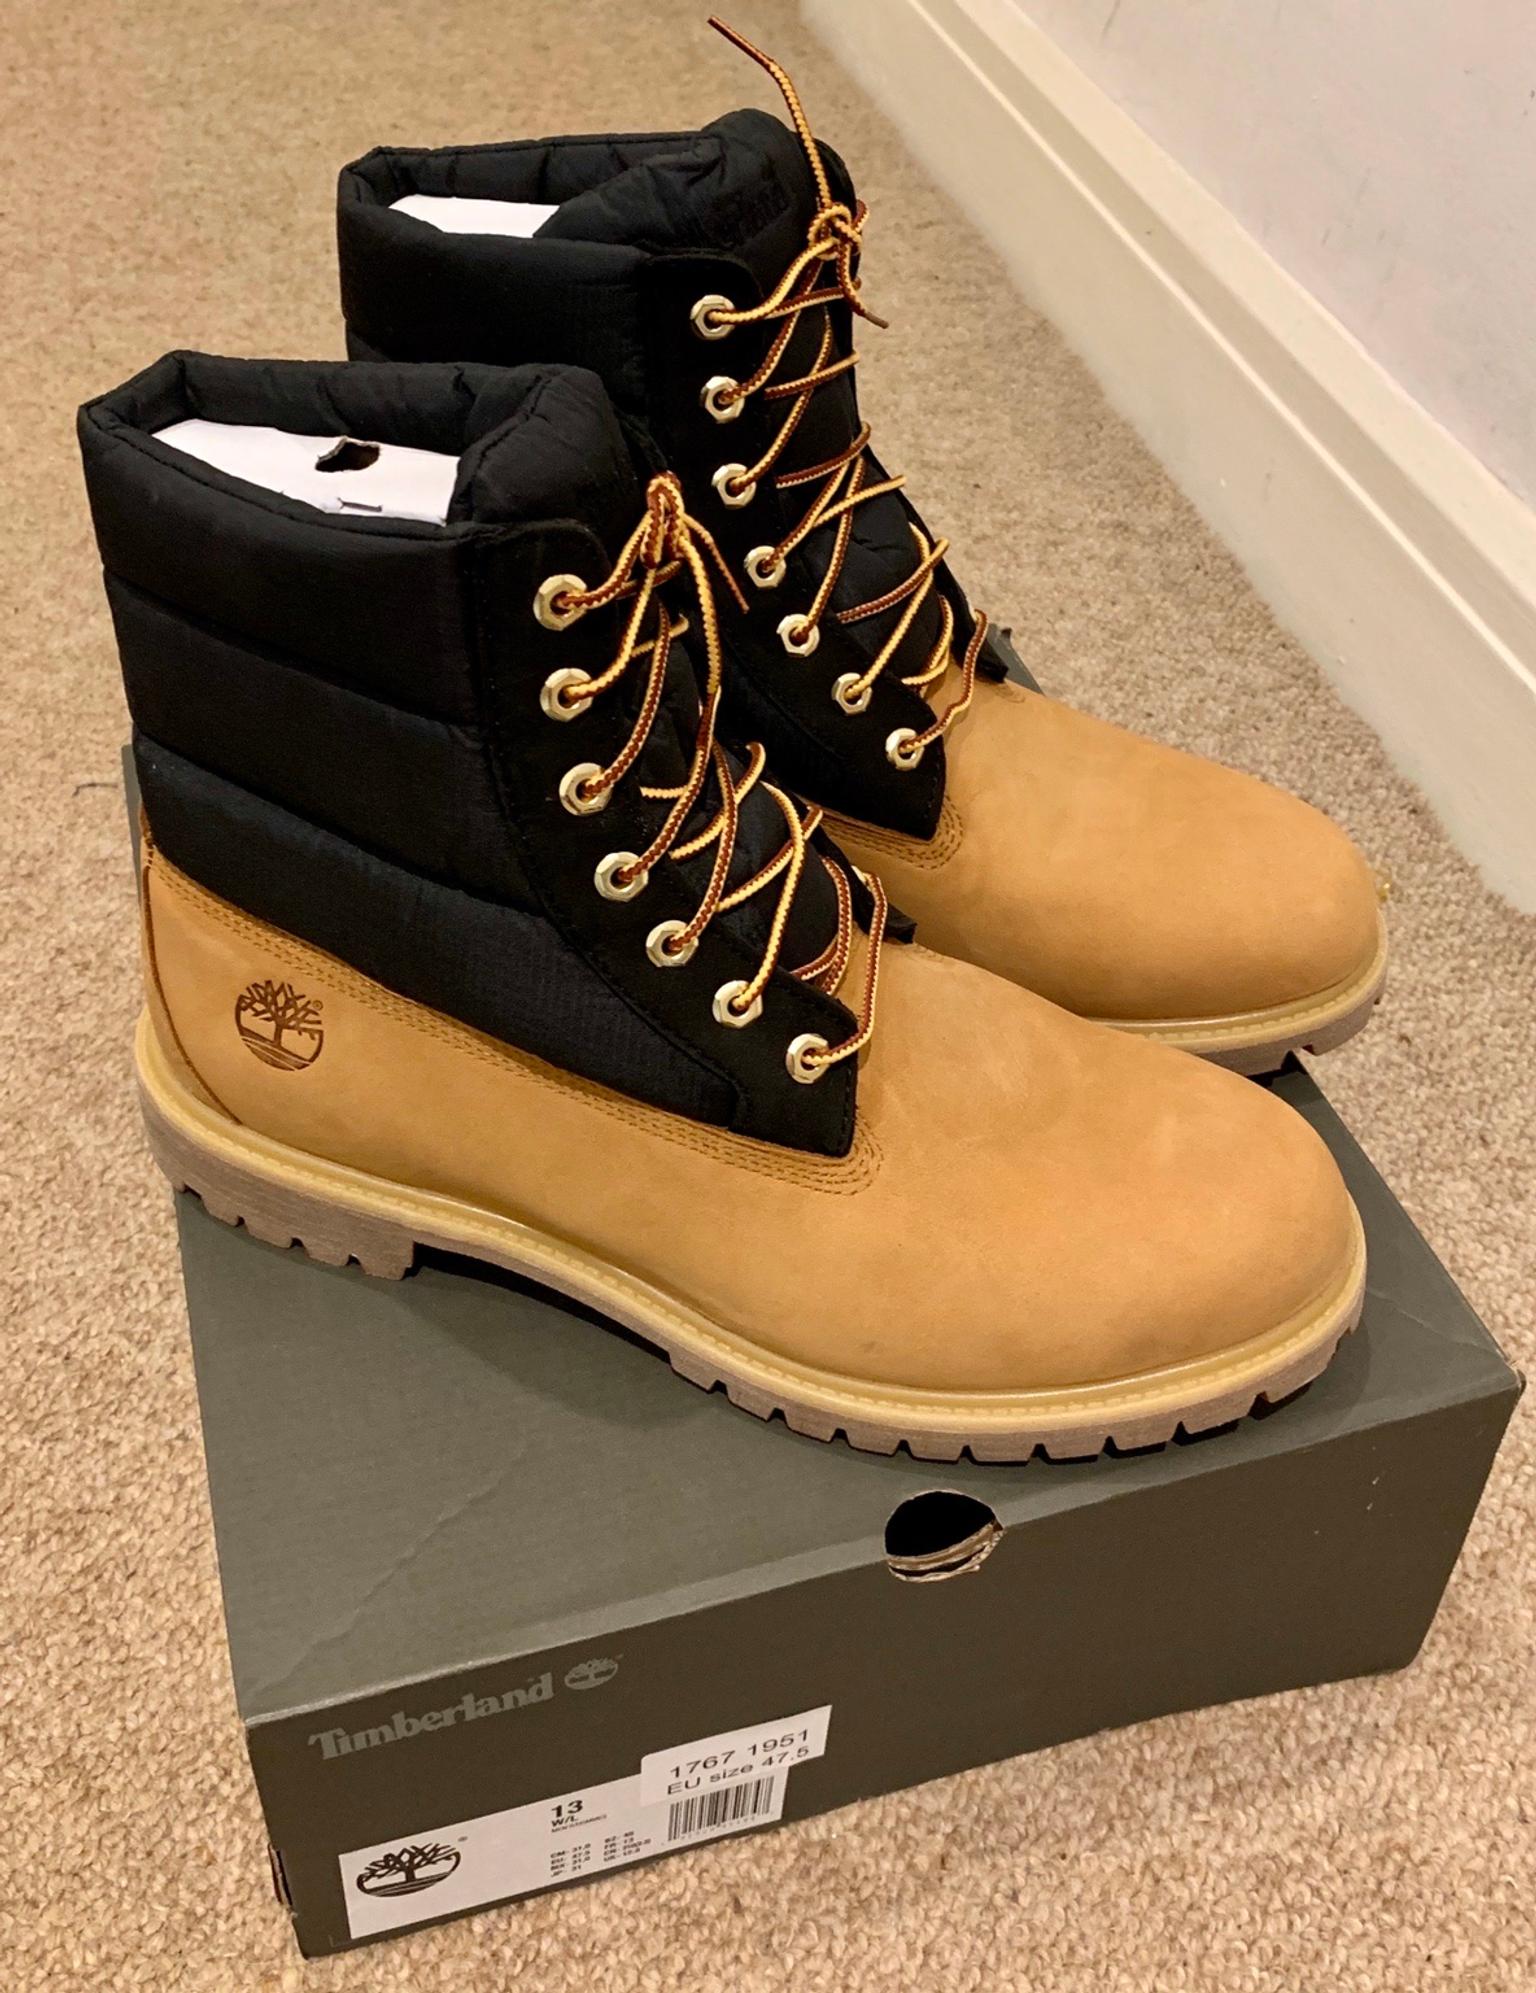 Mens Timberland boots Uk 12.5 in W14 